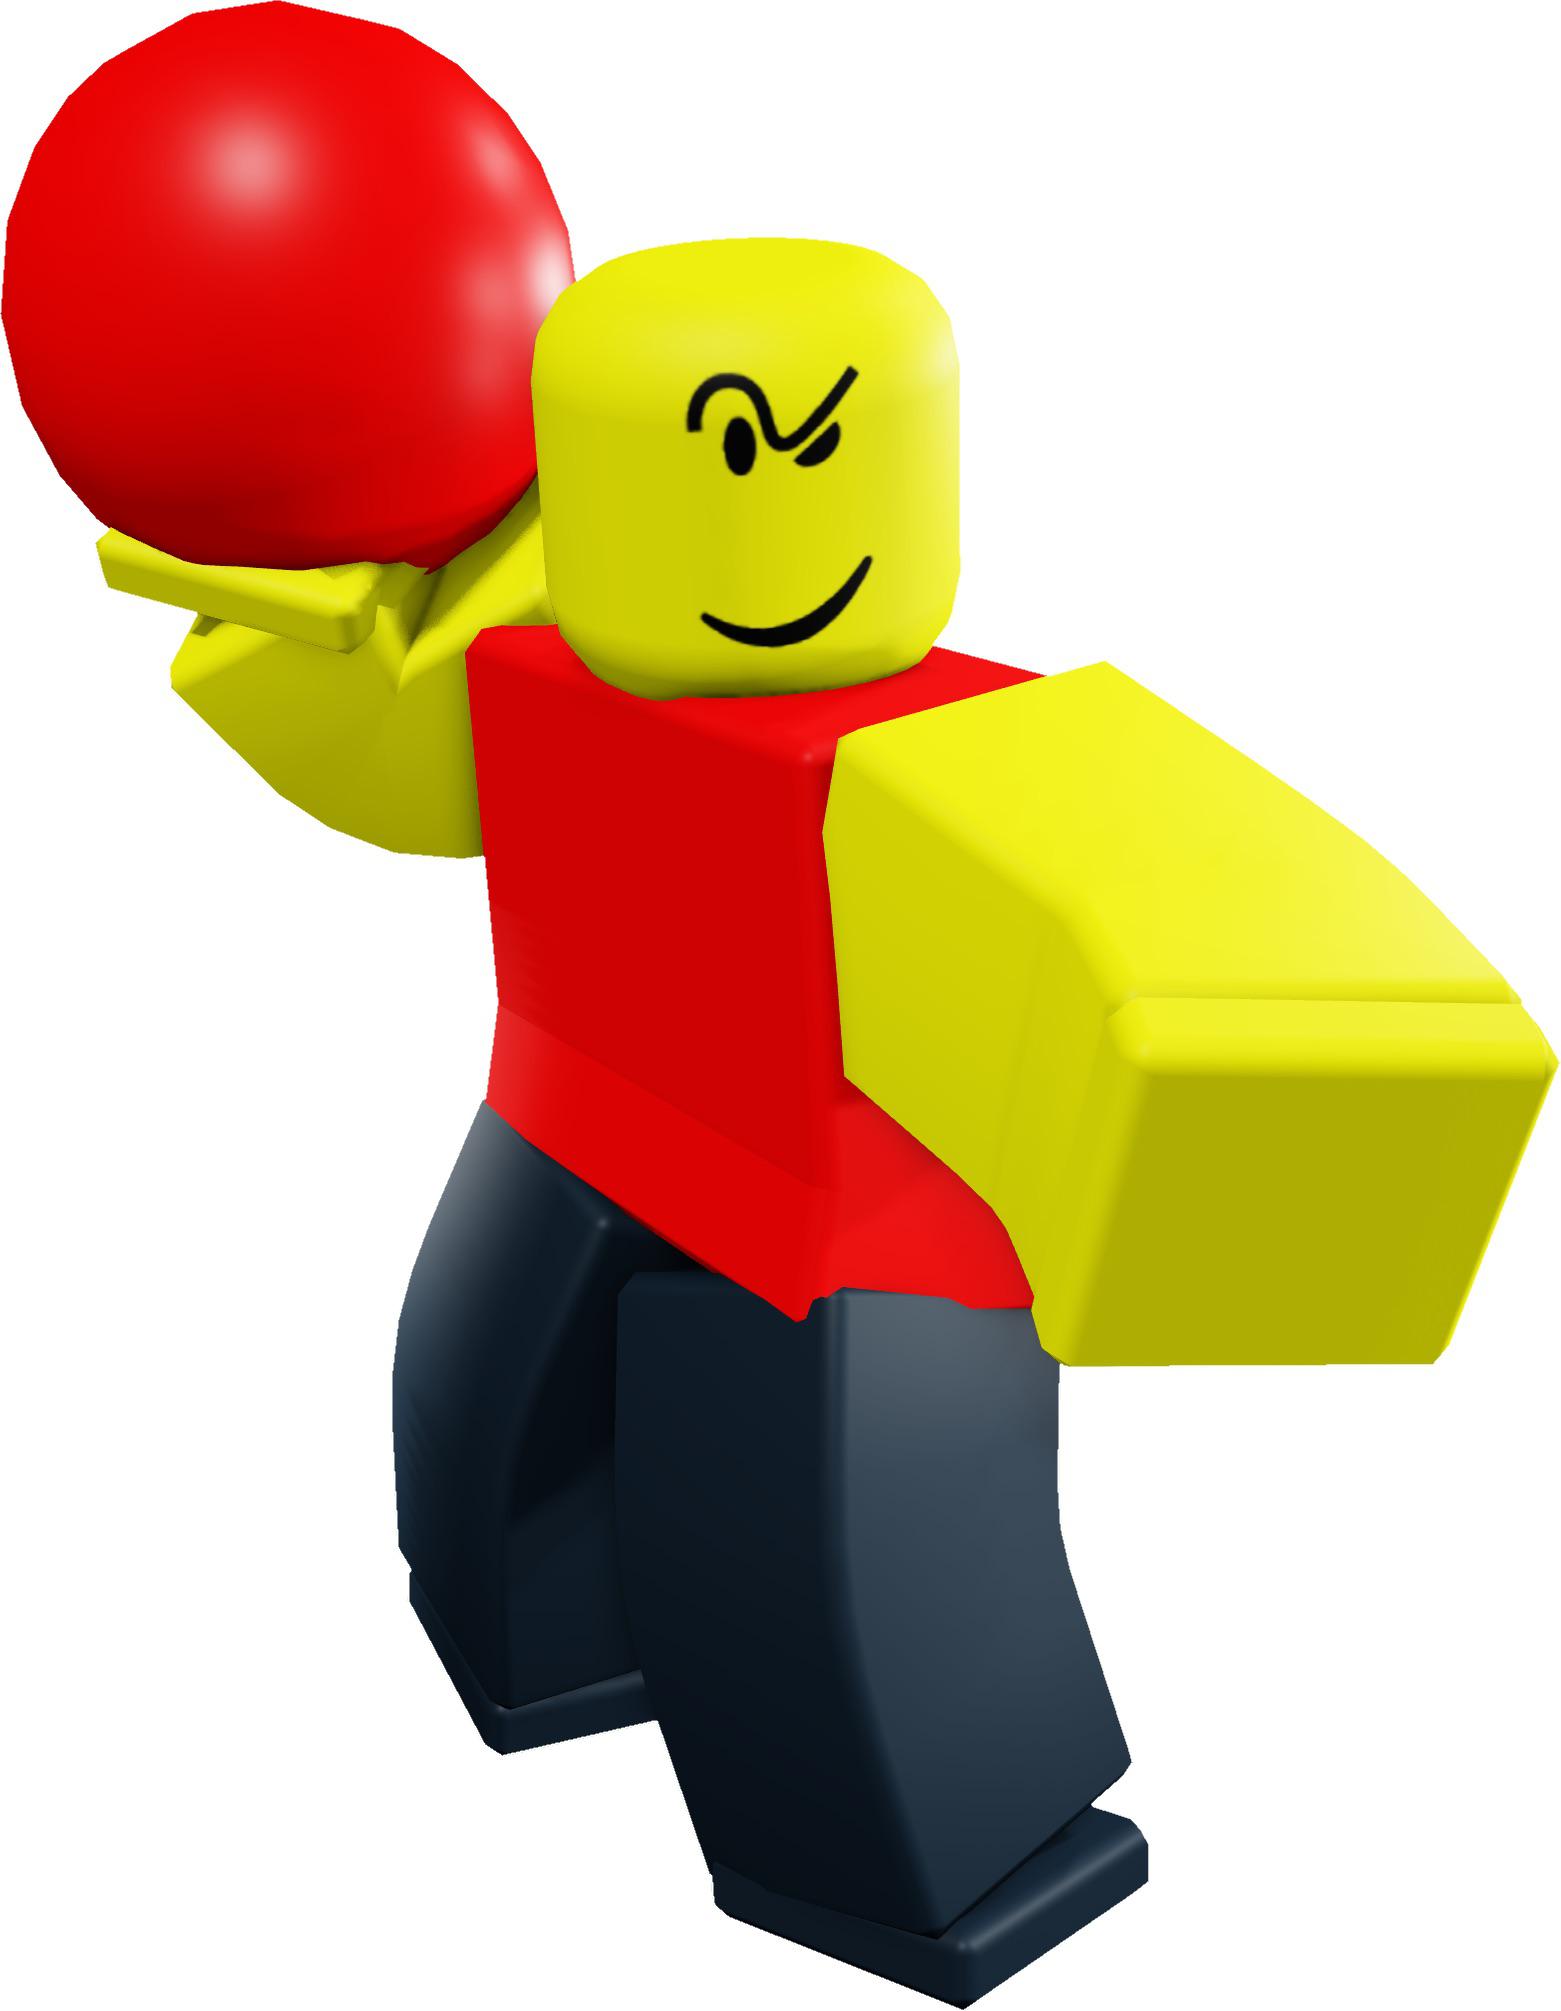 fanart of baller from roblox boss fighting stages, Roblox Baller / Stop  Posting About Baller